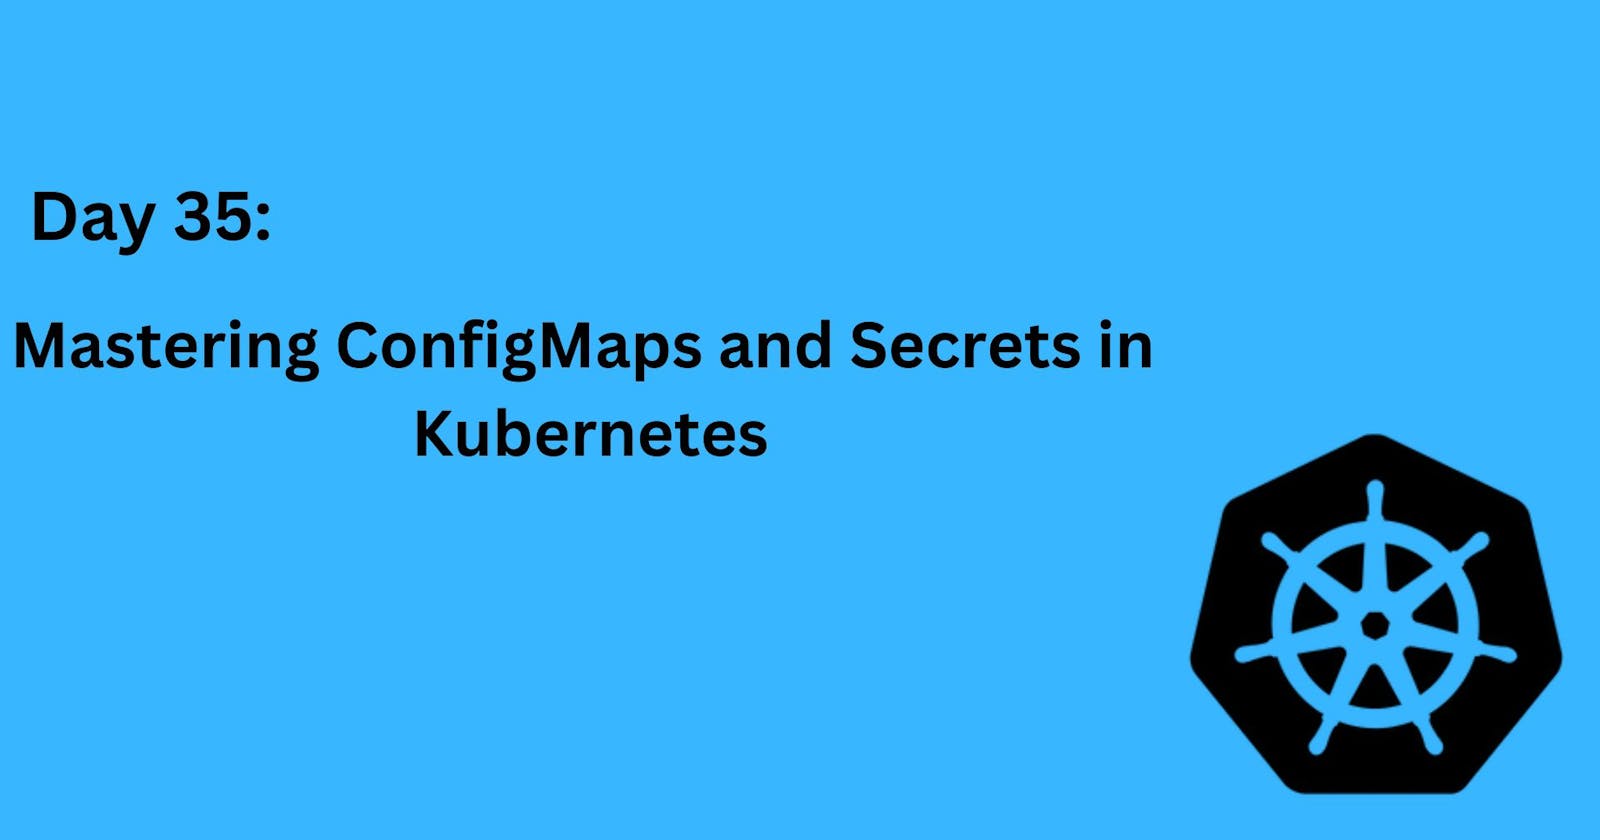 Day 35: Mastering ConfigMaps and Secrets in Kubernetes